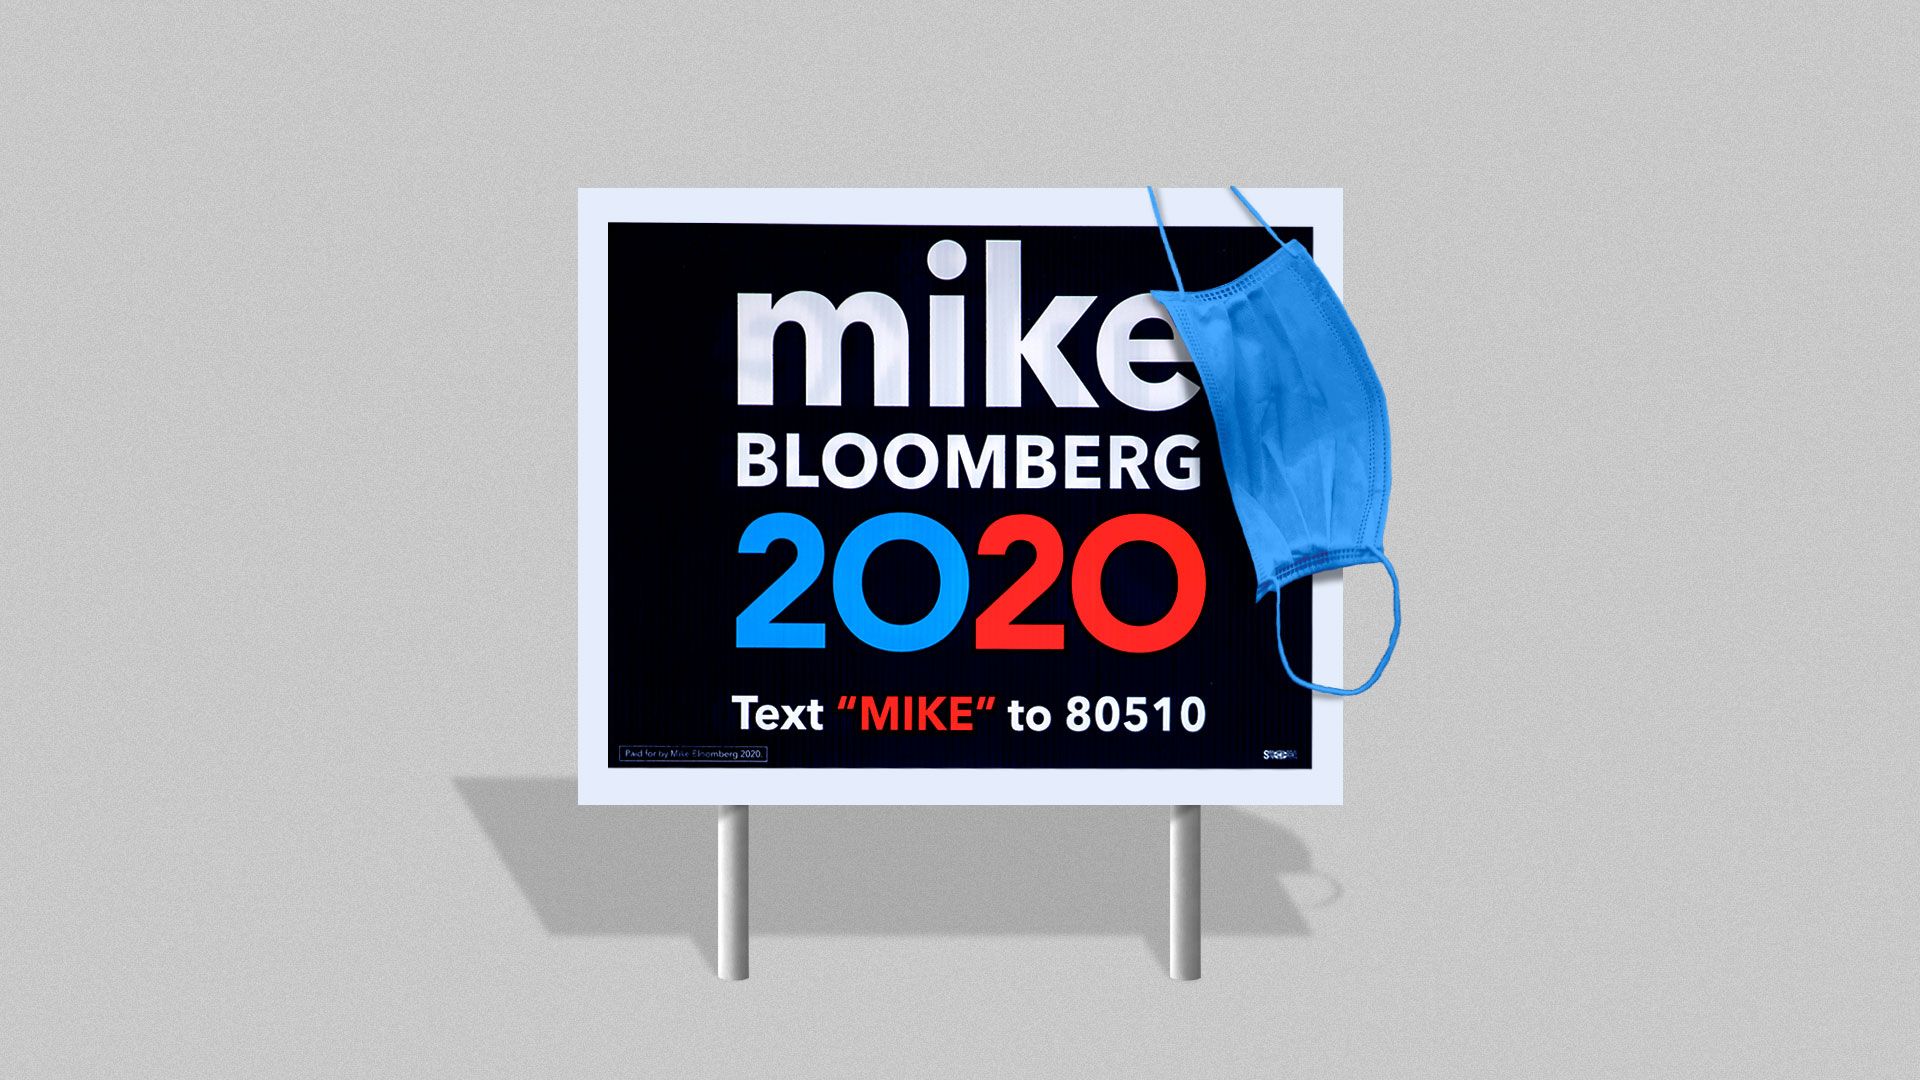 Illustration of a Bloomberg 2020 yard sign with a face mask draped over it